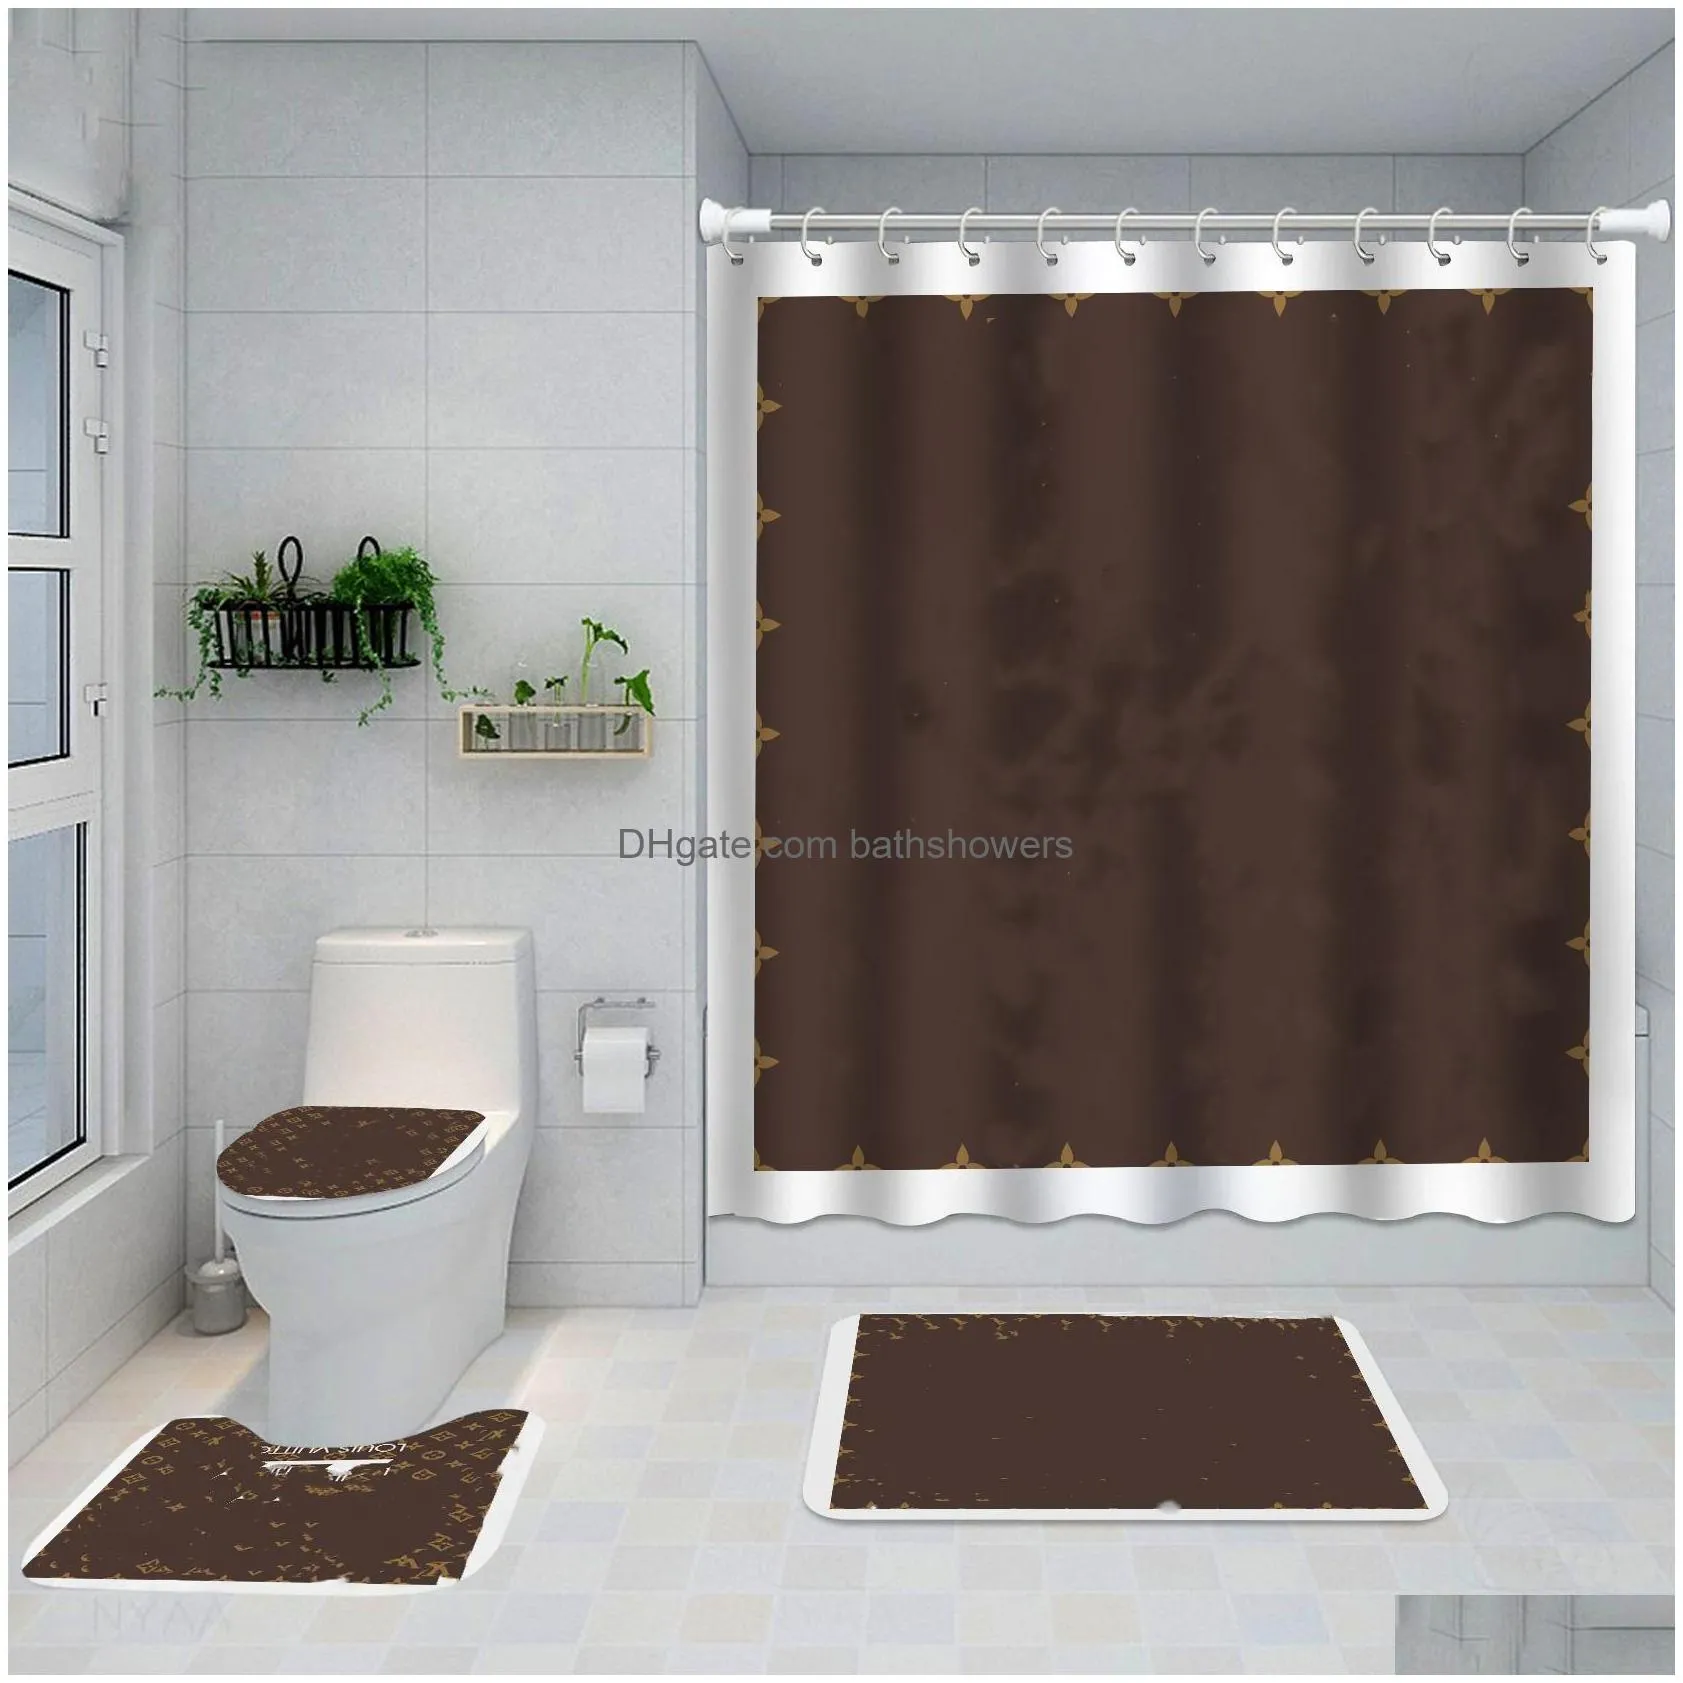 Letter Shower Curtains Digital Printing Waterproof Home Curtain Polyester Cloth Bathroom Four-Piece Set Drop Delivery Dhmsv